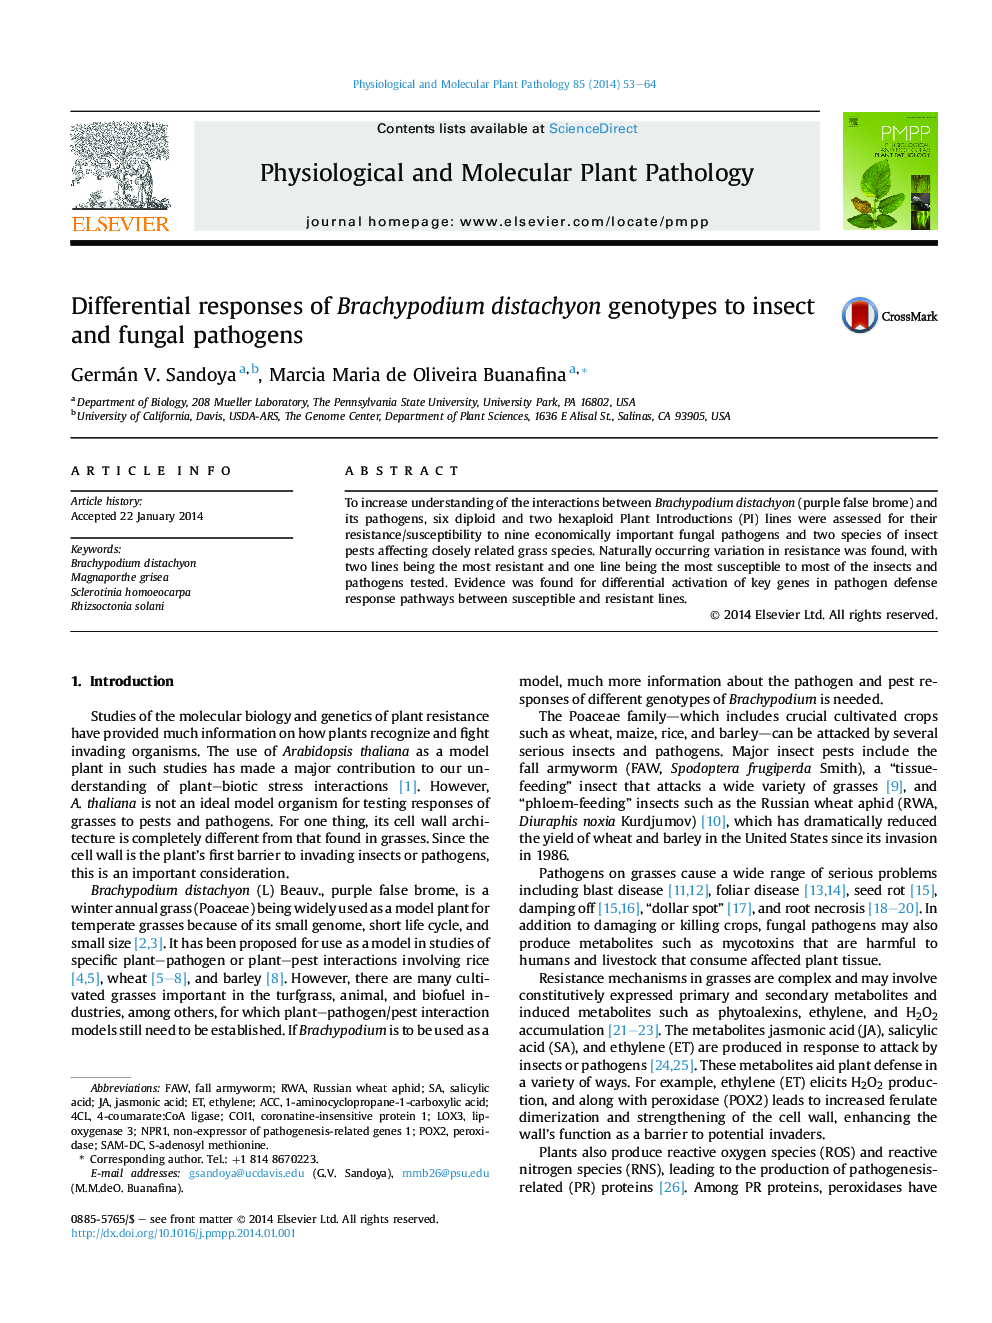 Differential responses of Brachypodium distachyon genotypes to insect and fungal pathogens